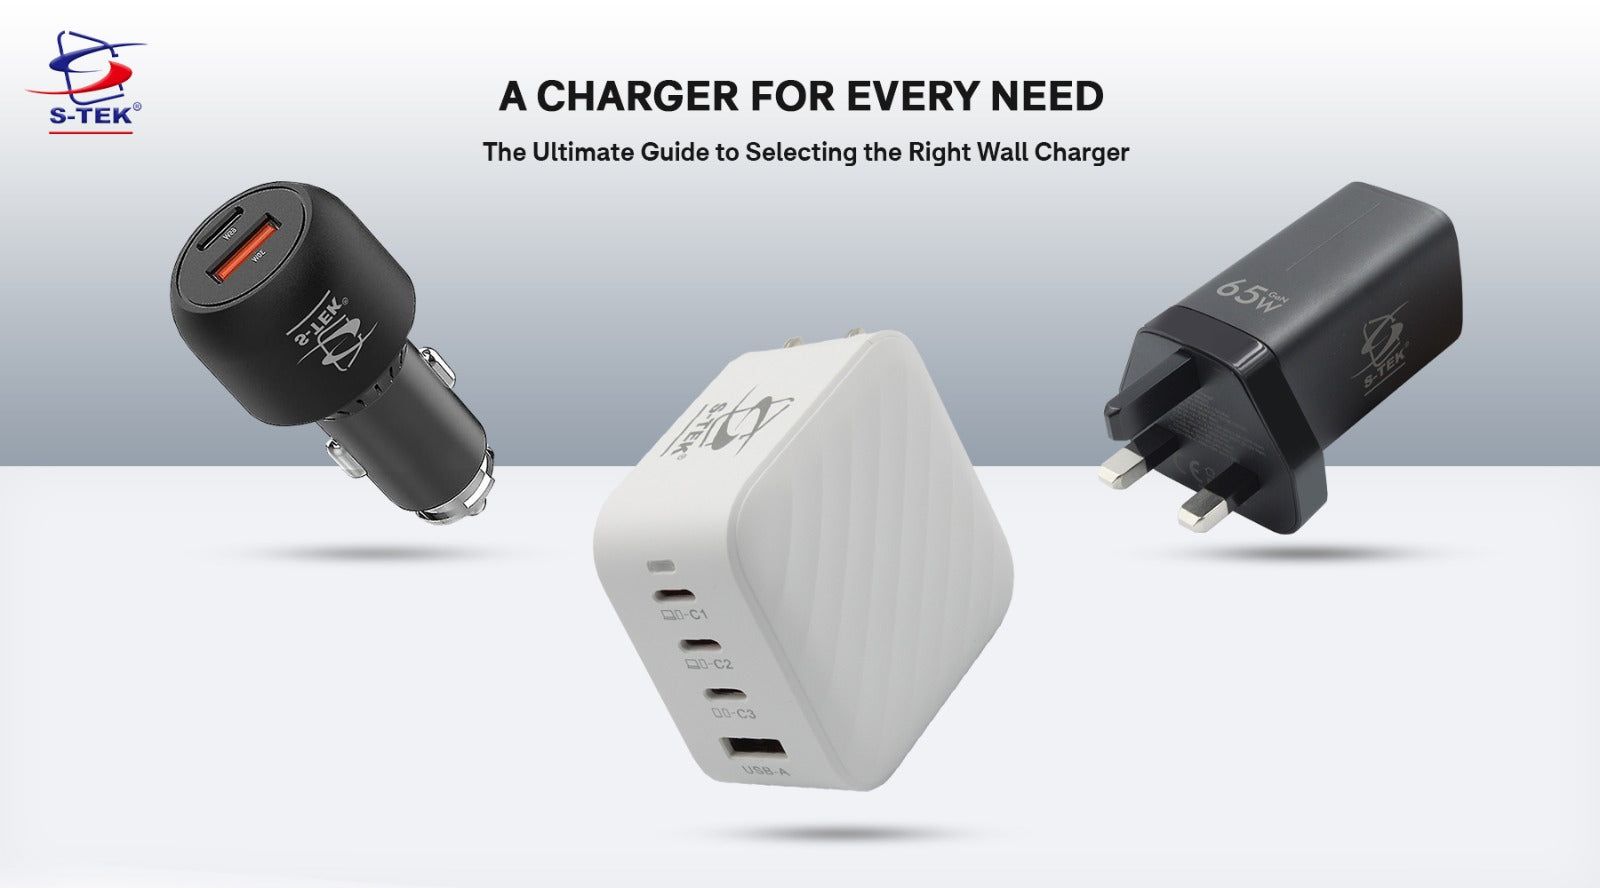 A Charger for Every Need: The Ultimate Guide to Selecting the Right Wall Charger